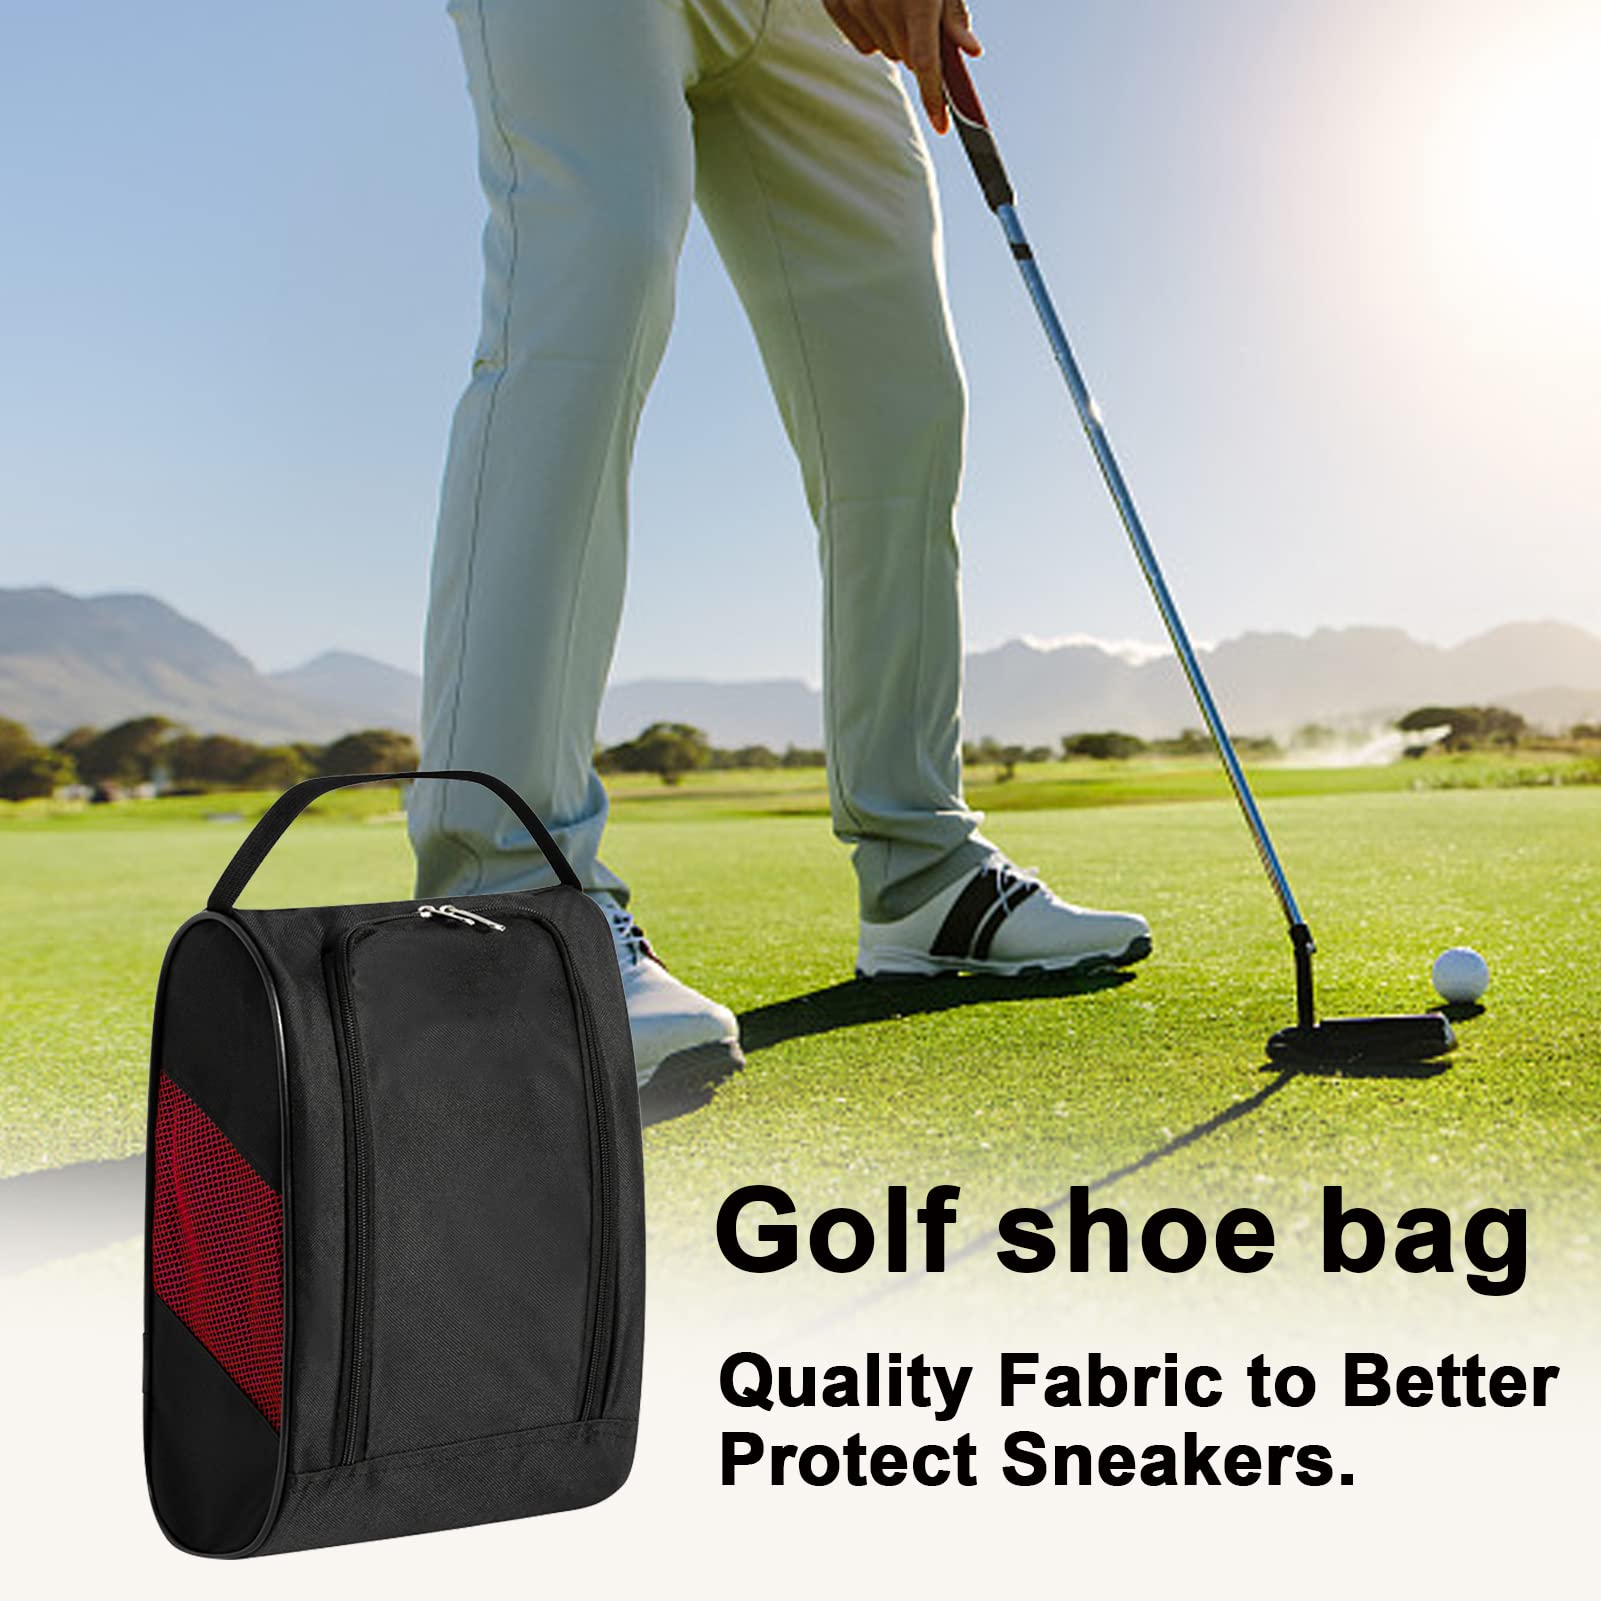 Golf Shoe Case, Shoe Holder, Shoe Bag, Deform-Resistant, Double Zipper, Easy to Open and Close, Includes Handle, Breathable, Easy to Carry Accessories, Waterproof, Sports, Shoe Bag, Mesh Case, Portable Pouch, Basketball, Football, Golf, Shoes, Tennis Shoe